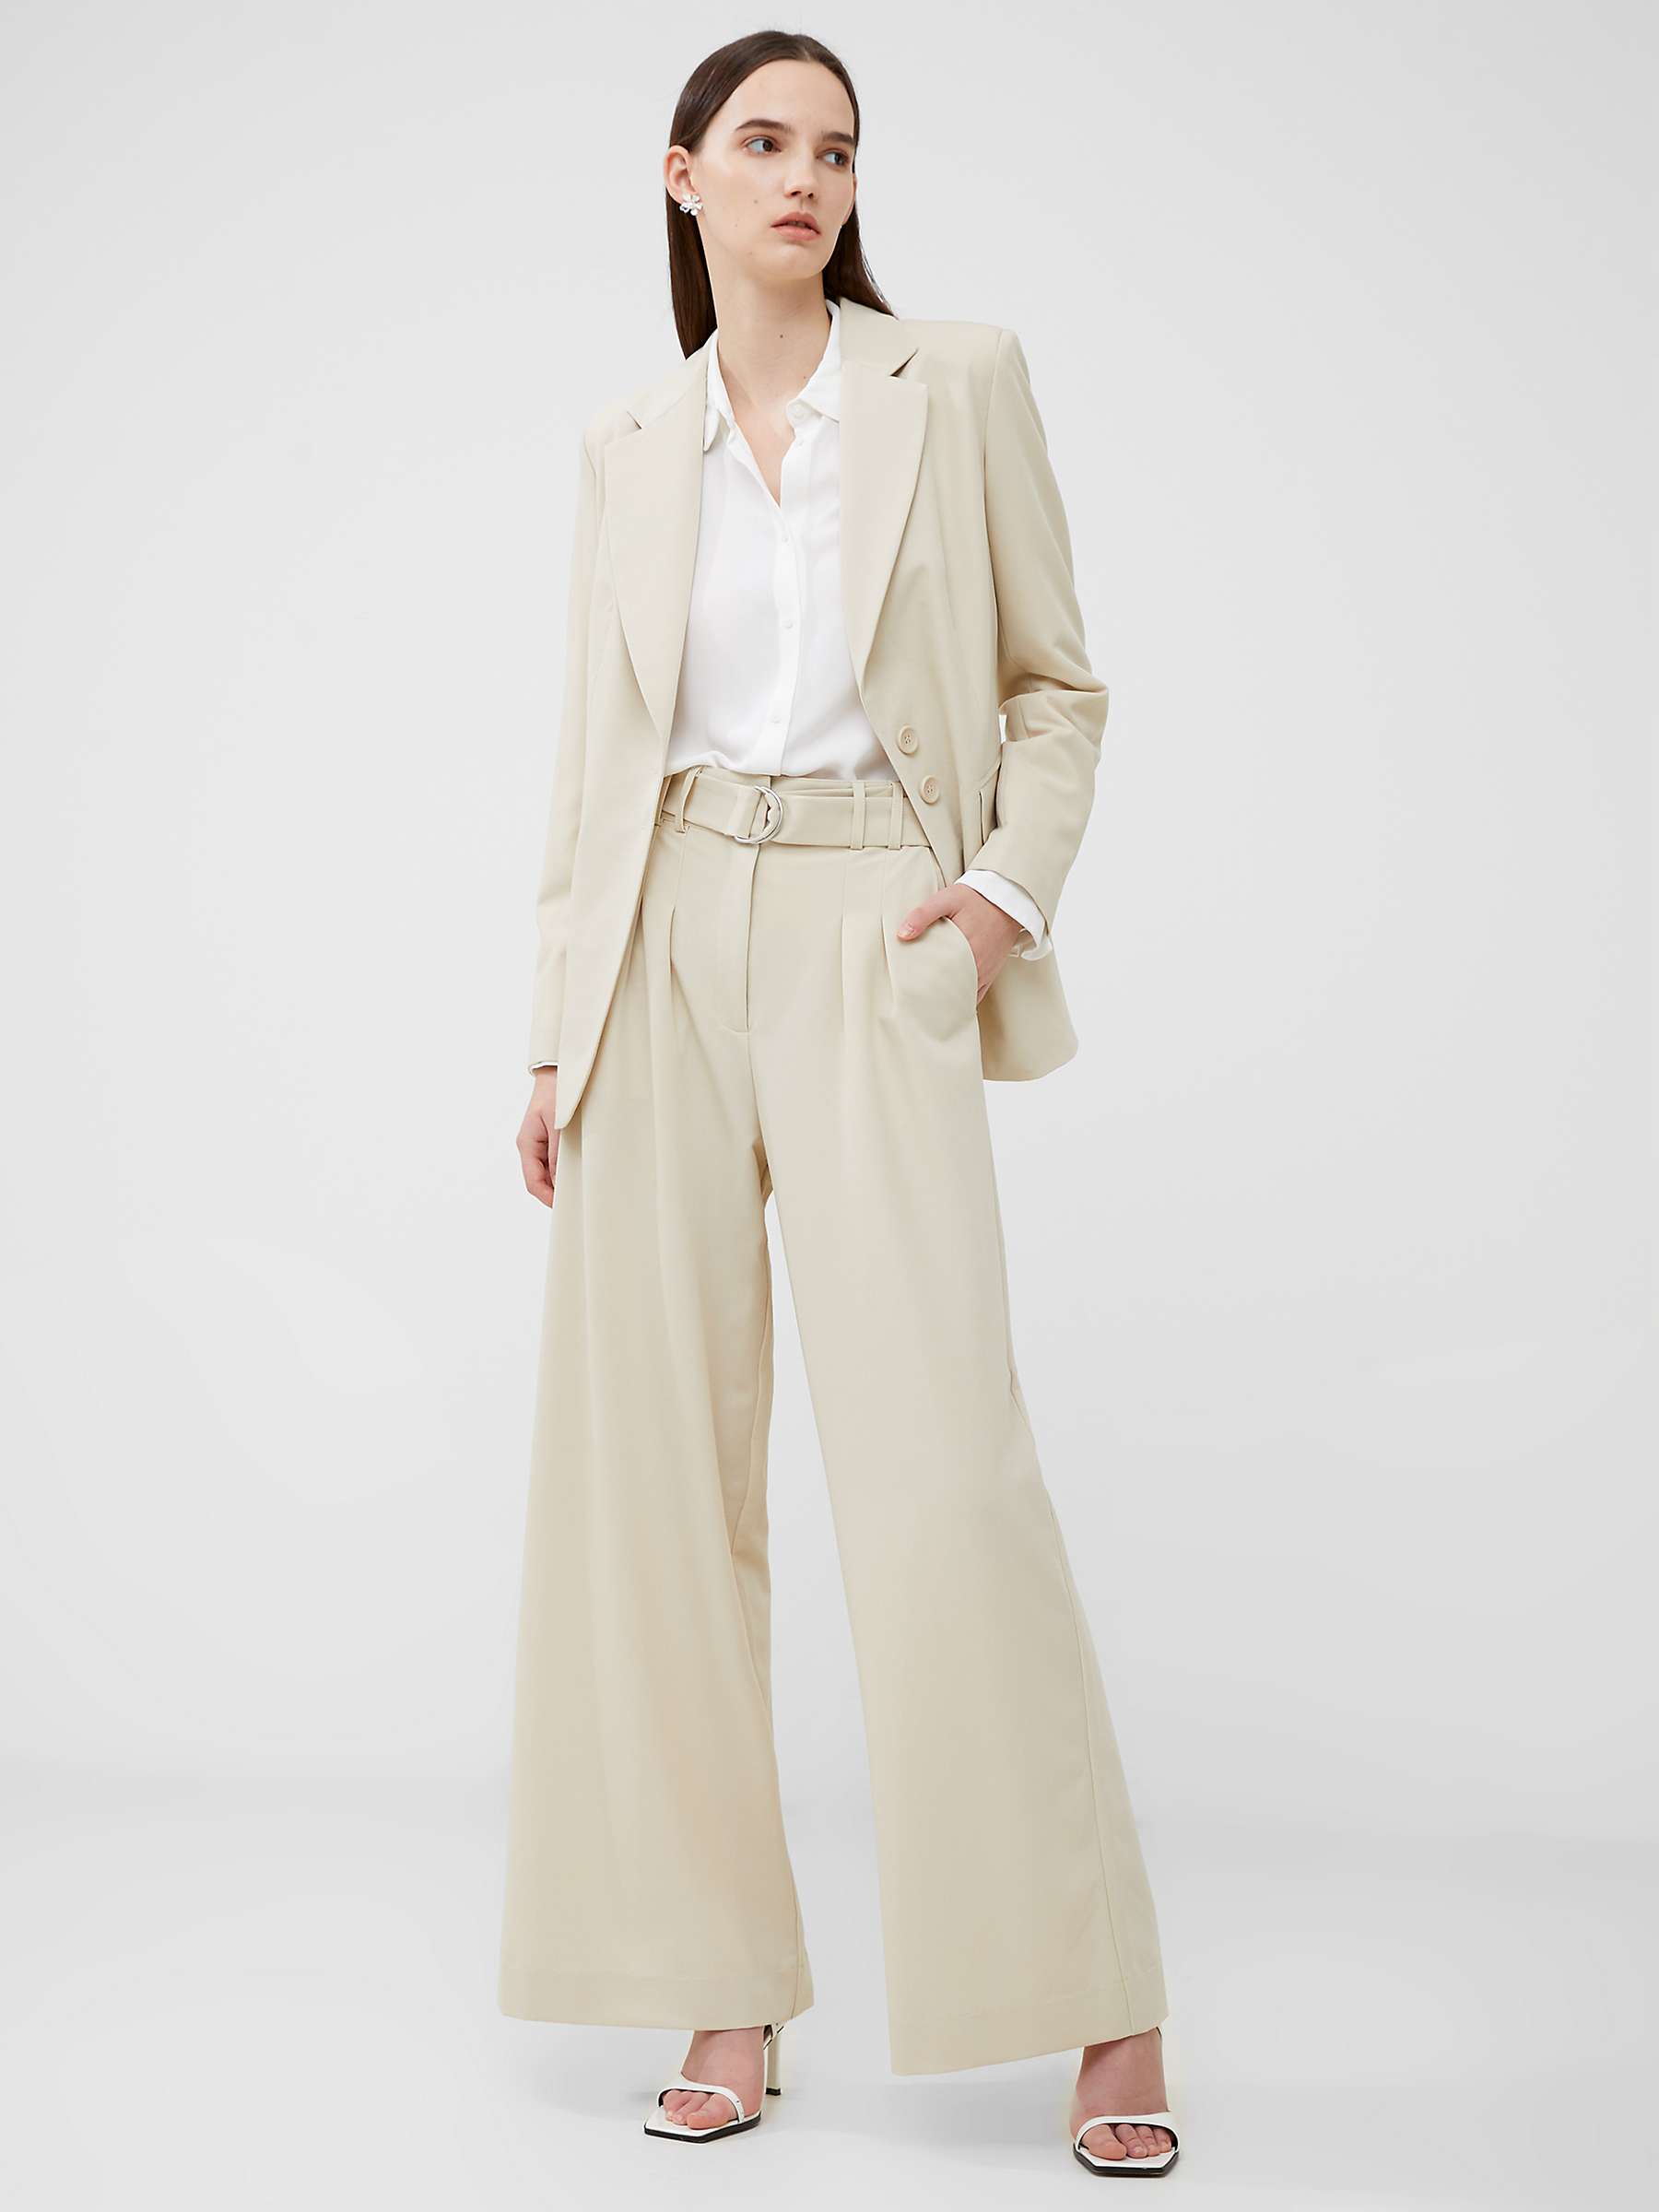 Buy French Connection Everly Suit Blazer, Oyster Gray Online at johnlewis.com